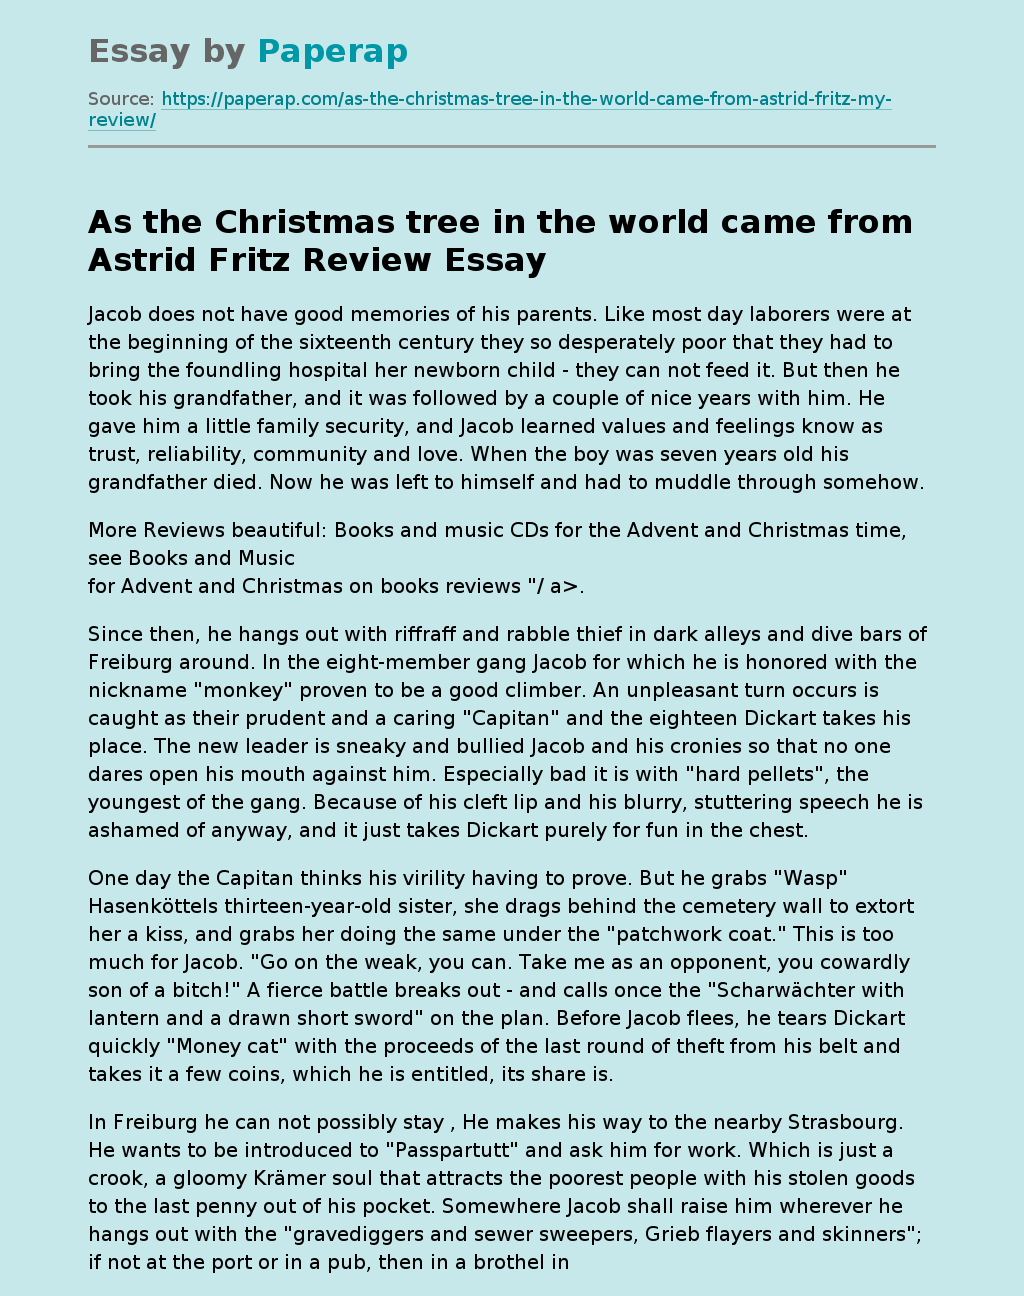 “As the Christmas Tree in the World Came” From Astrid Fritz